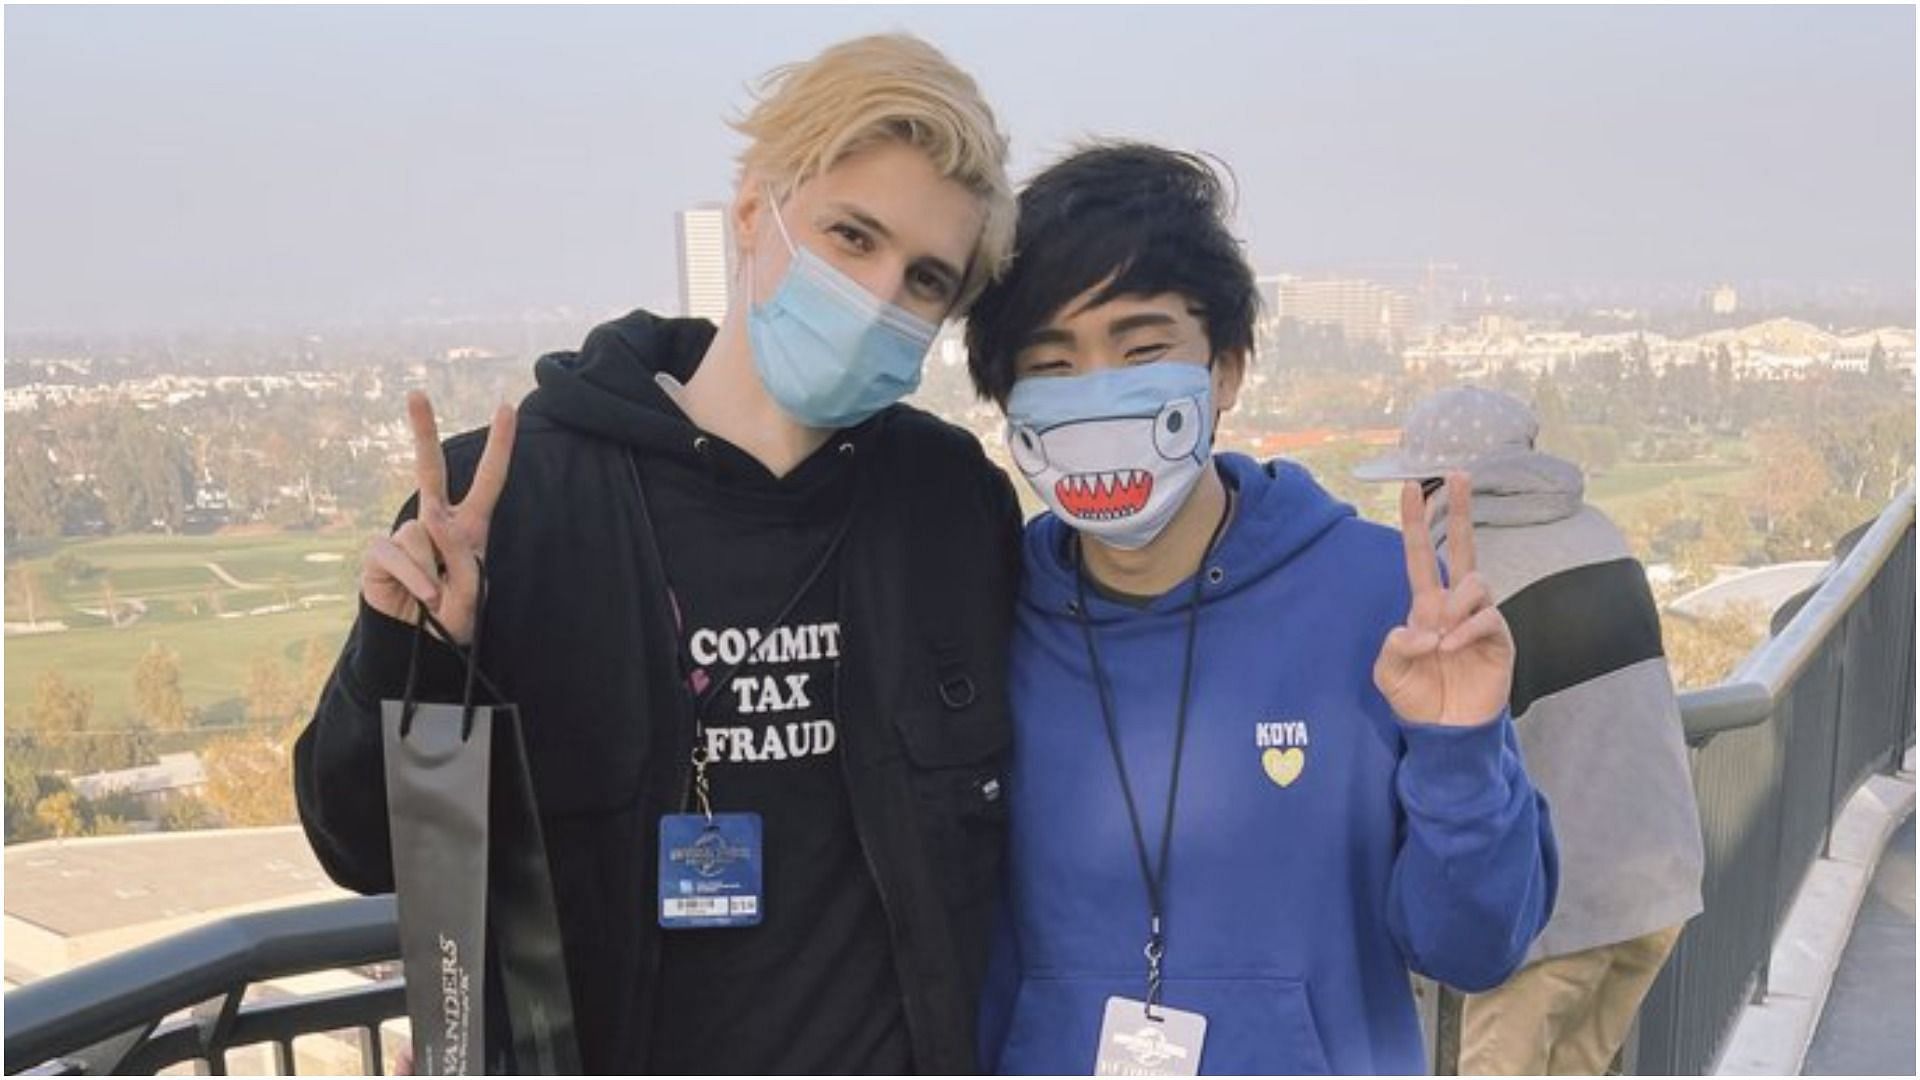 xQc (Left) and Sykkuno meeting for the first time (Image via Twitter xQc)